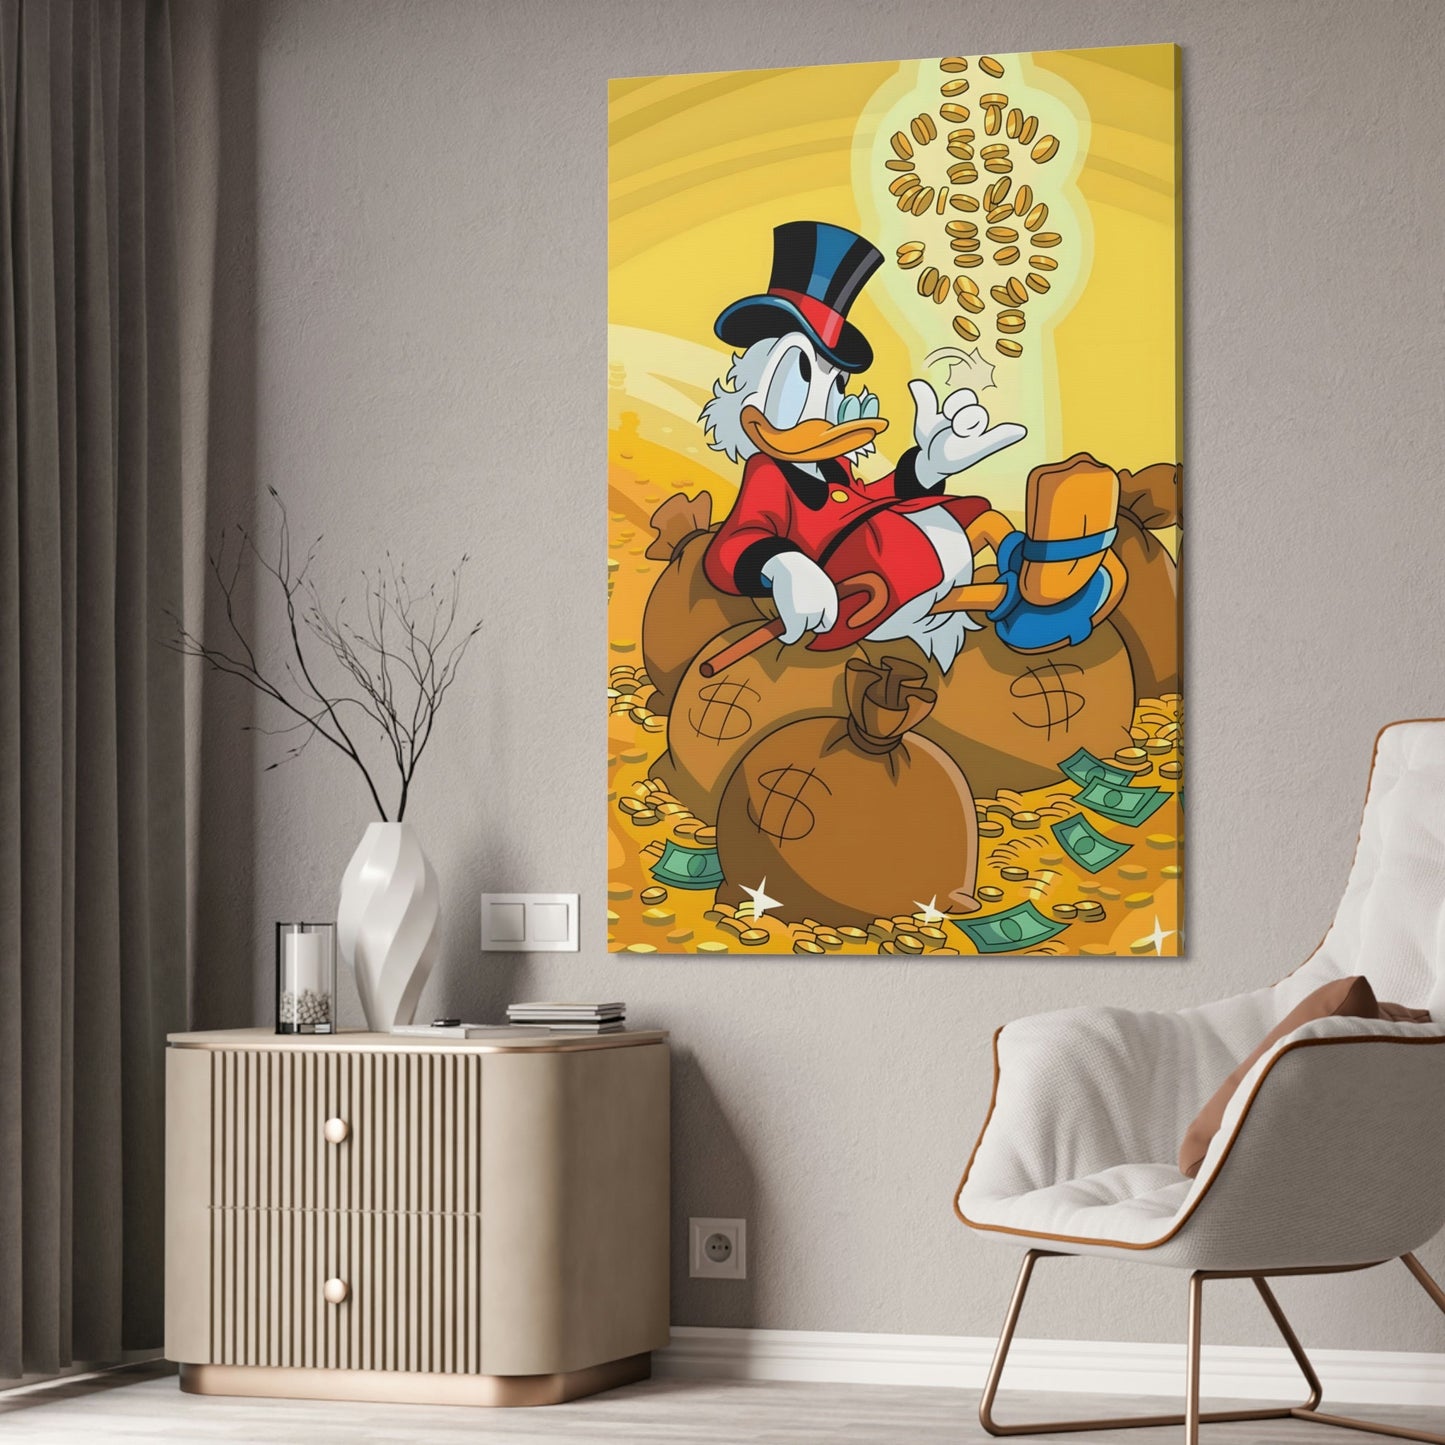 The Million-Dollar Duck: Street Art Style Canvas Print of a Duck by Alec Monopoly